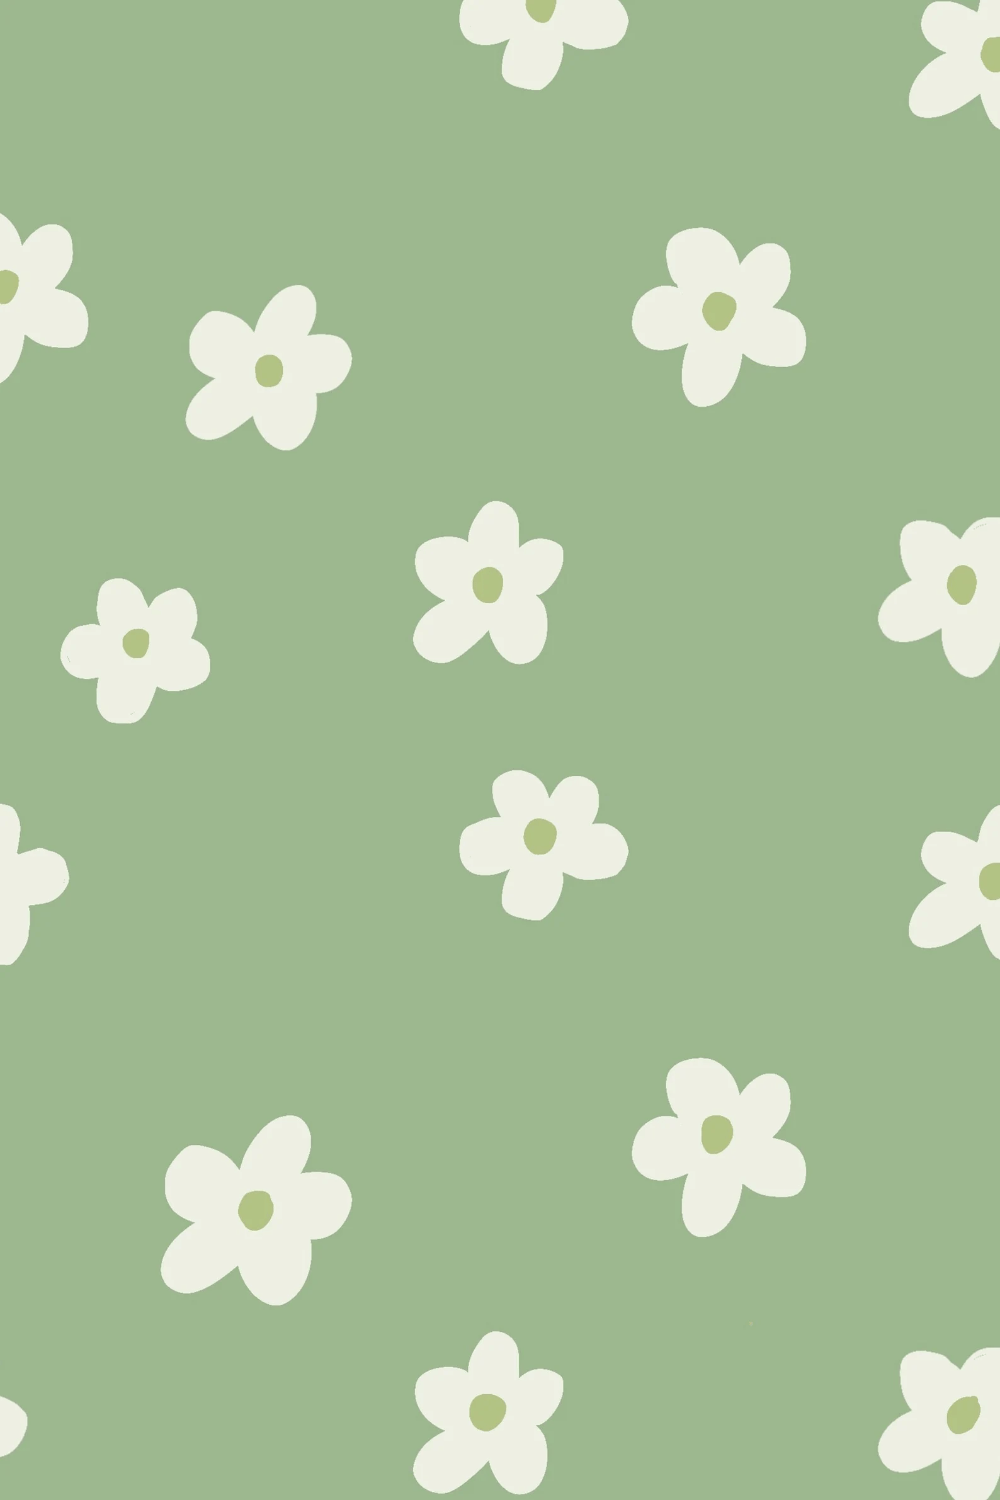 A green and white floral pattern - Sage green